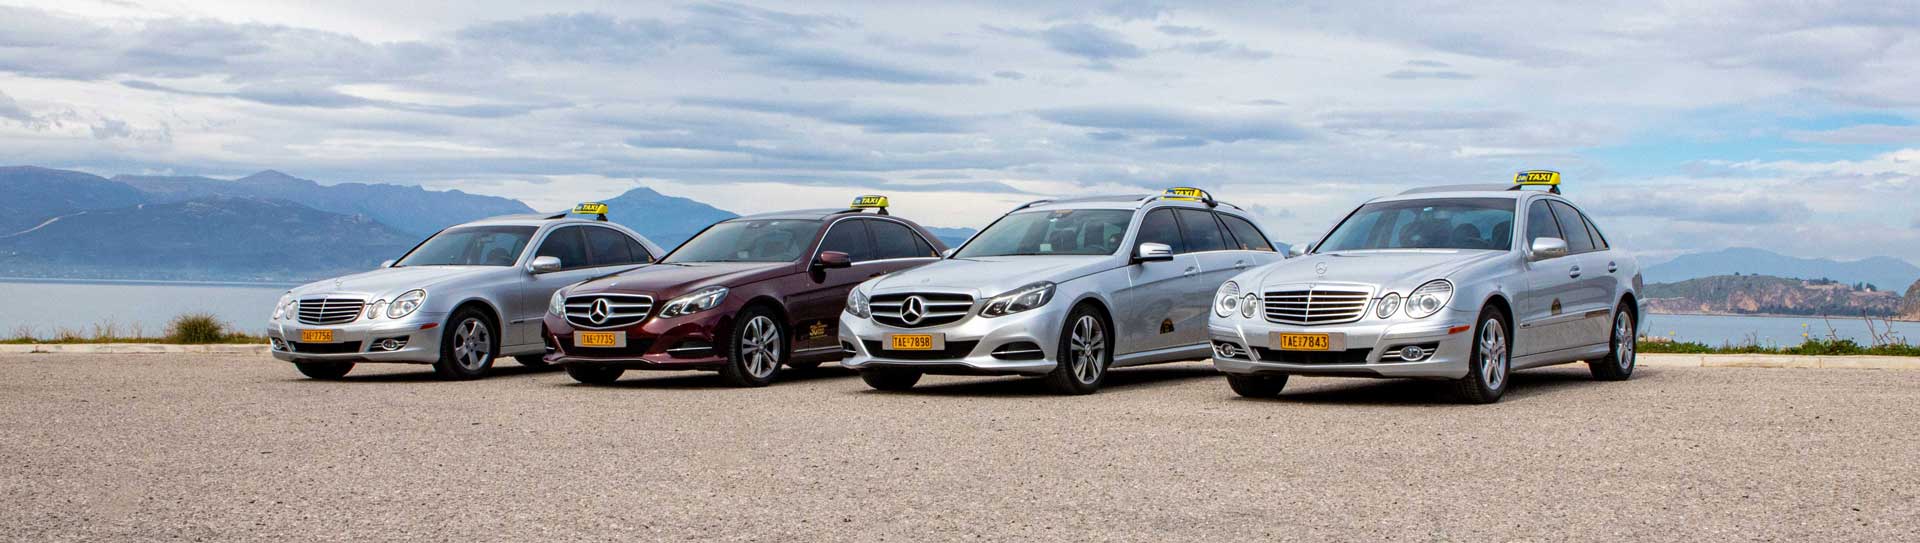 Taxi from Athens airport to Ermioni Private transfers